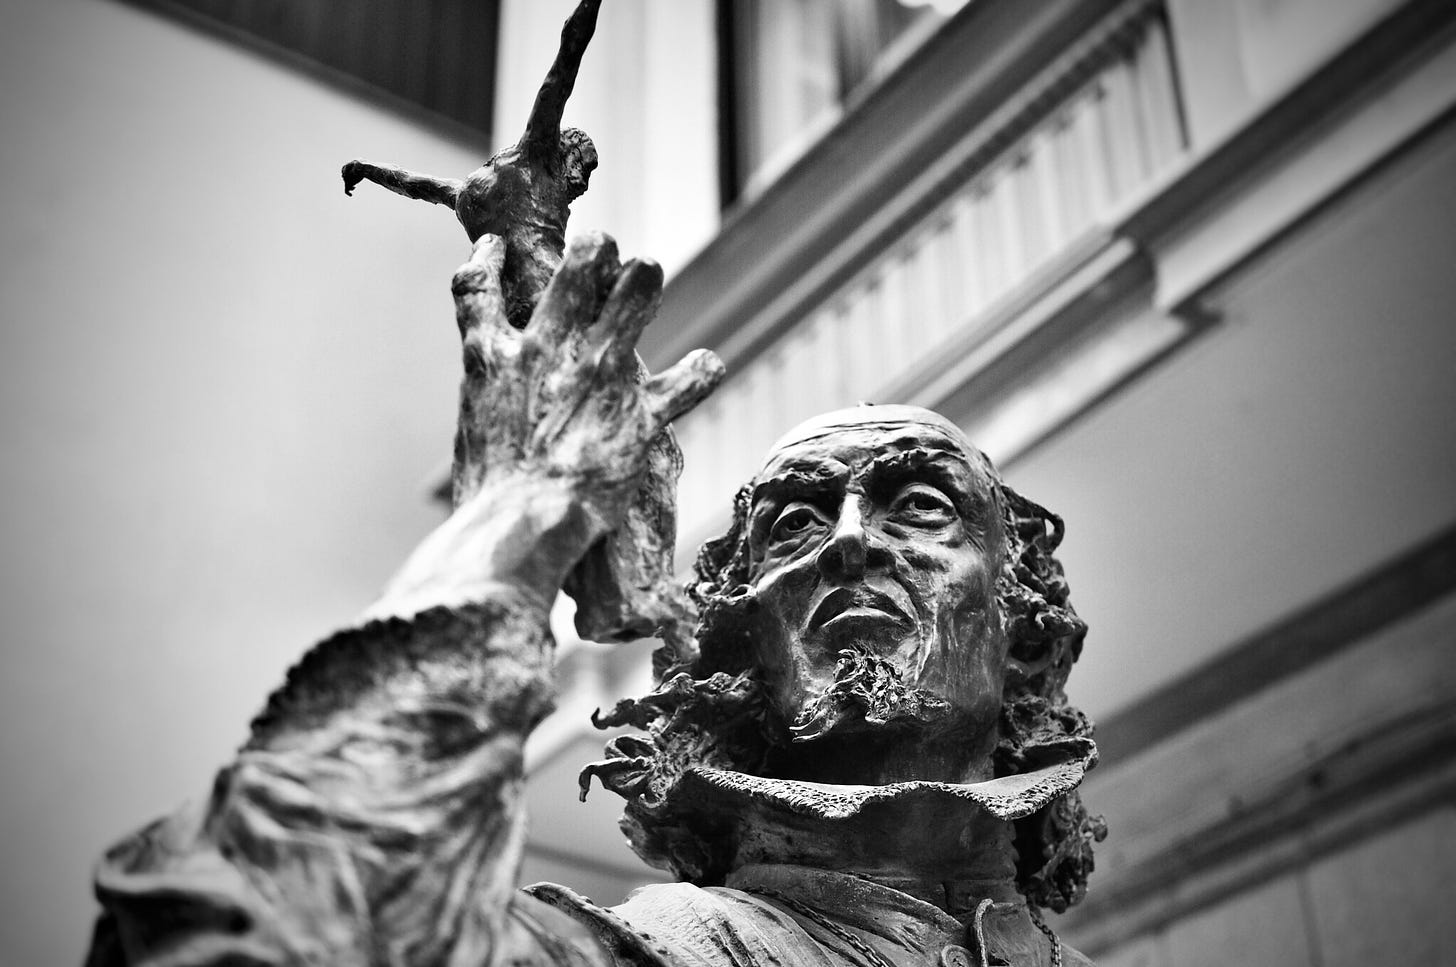 A black and white photo of a statue of a sculpter holding a crucifix he had made to inspect it. His eyes look keenly on the small figure.